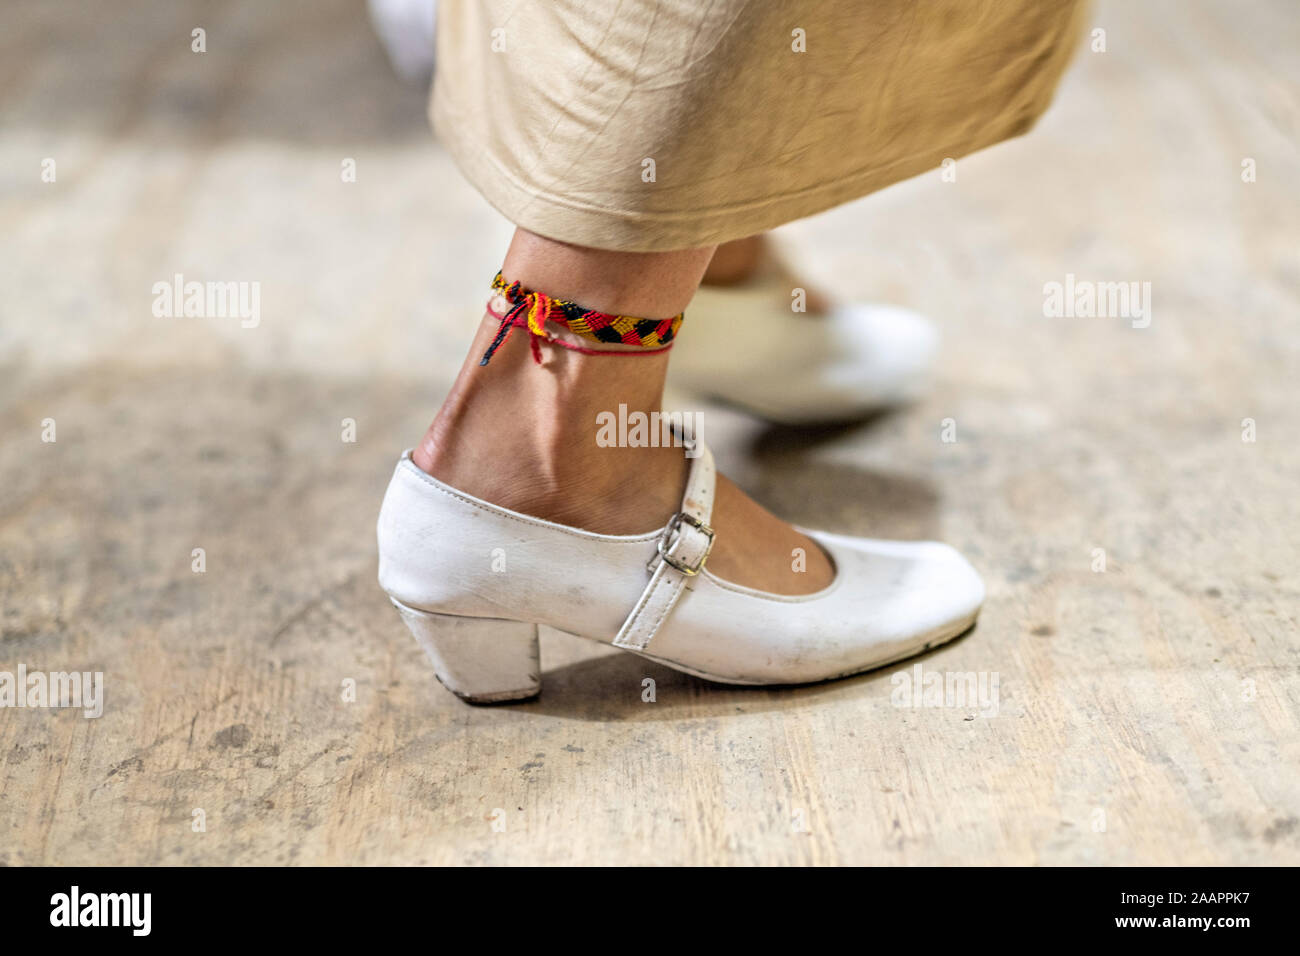 Zapateado dancers perform a traditional folk dance during a neighborhood Huapango in Santiago Tuxtla, Veracruz, Mexico. The dance involves dancers striking their shoes on a wooden platform while a large group of musicians play string instruments. The gatherings take part in the Los Tuxtlas mountain villages for single people to meet. Stock Photo